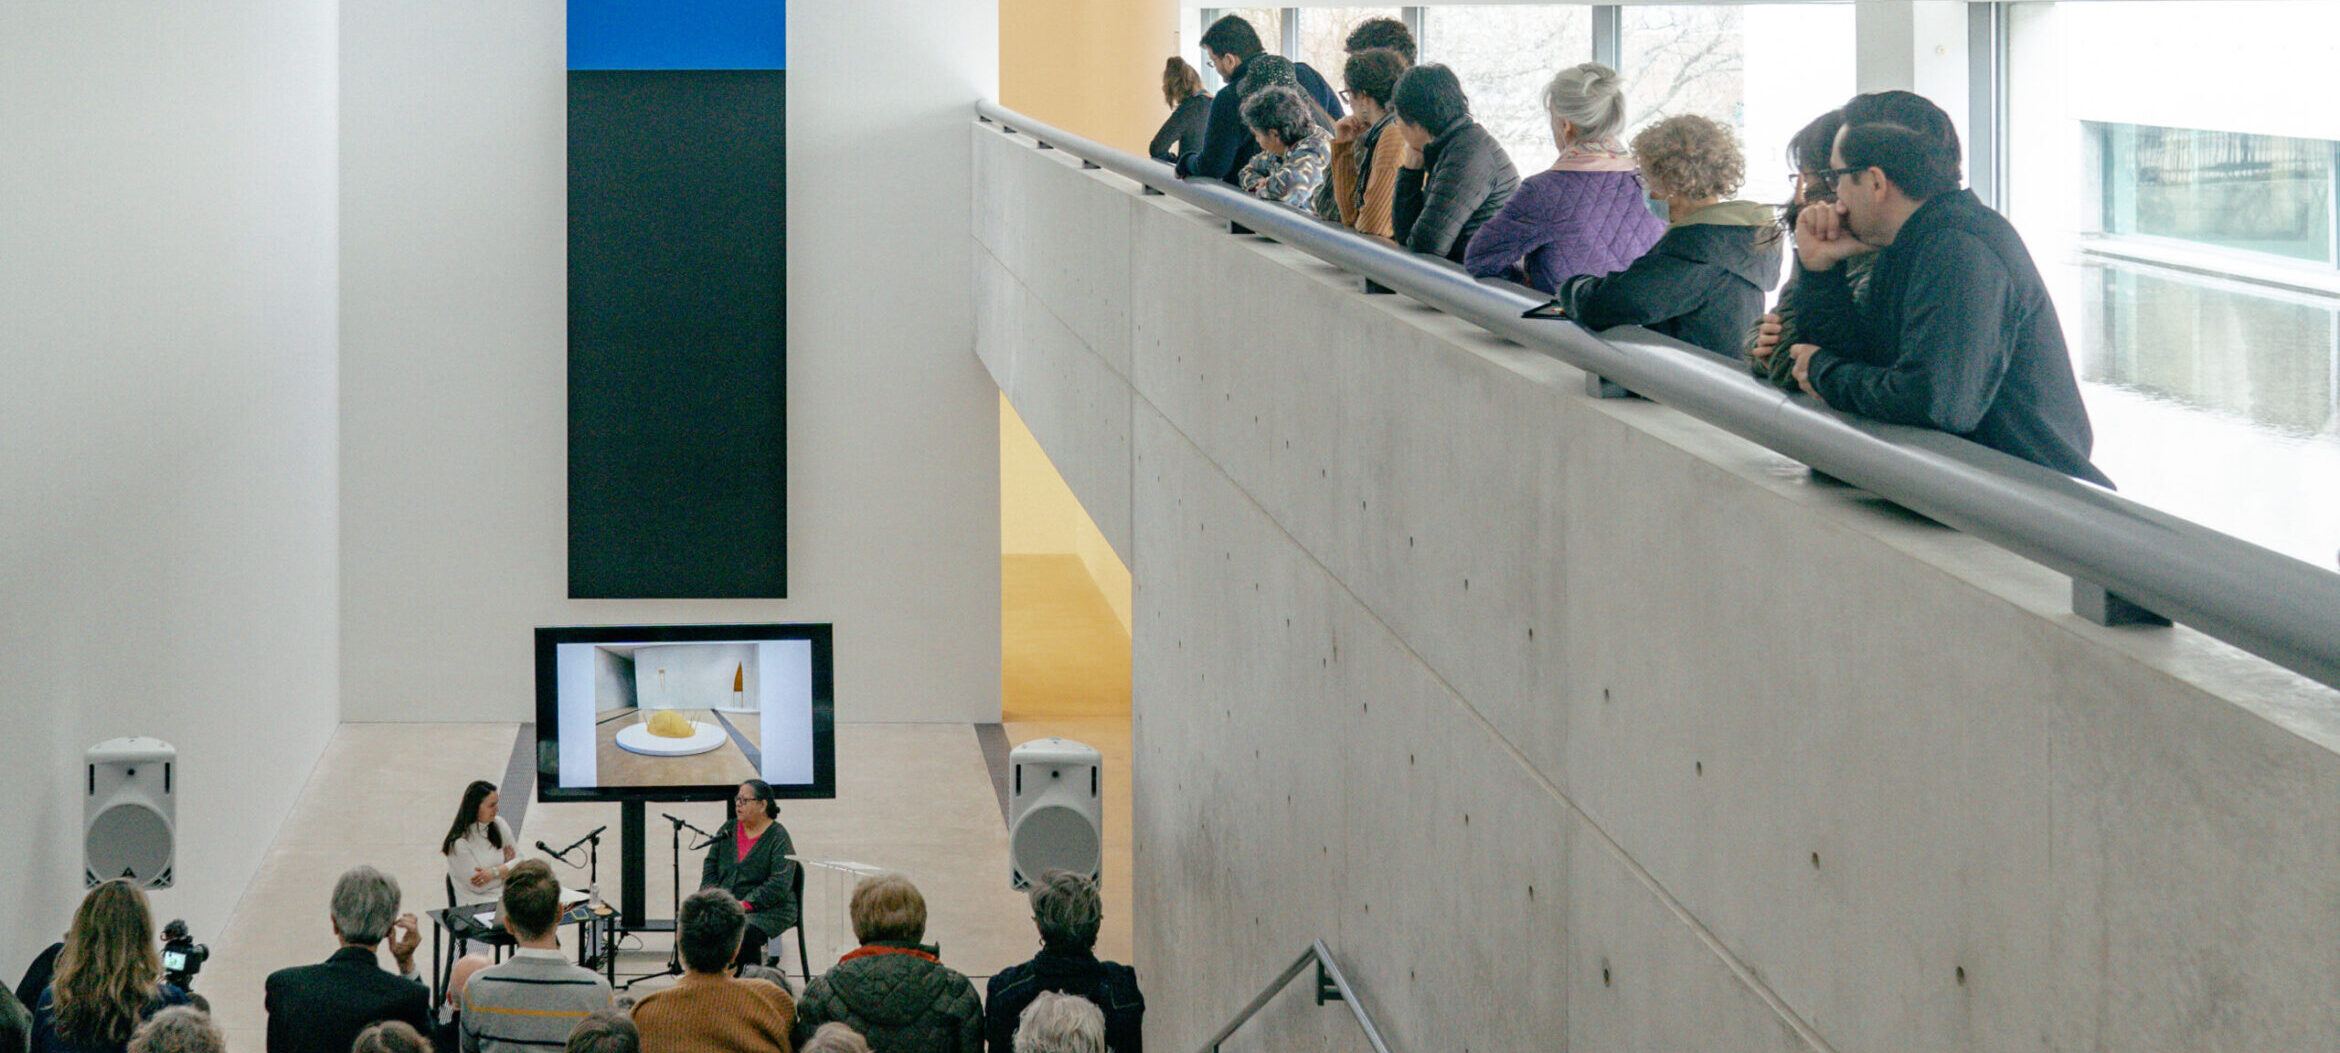 Artist Talk program with Faye HeavyShield and curator Tamara Schenkenberg, sitting in front of blue and black vertical painting, surrounded by an audience